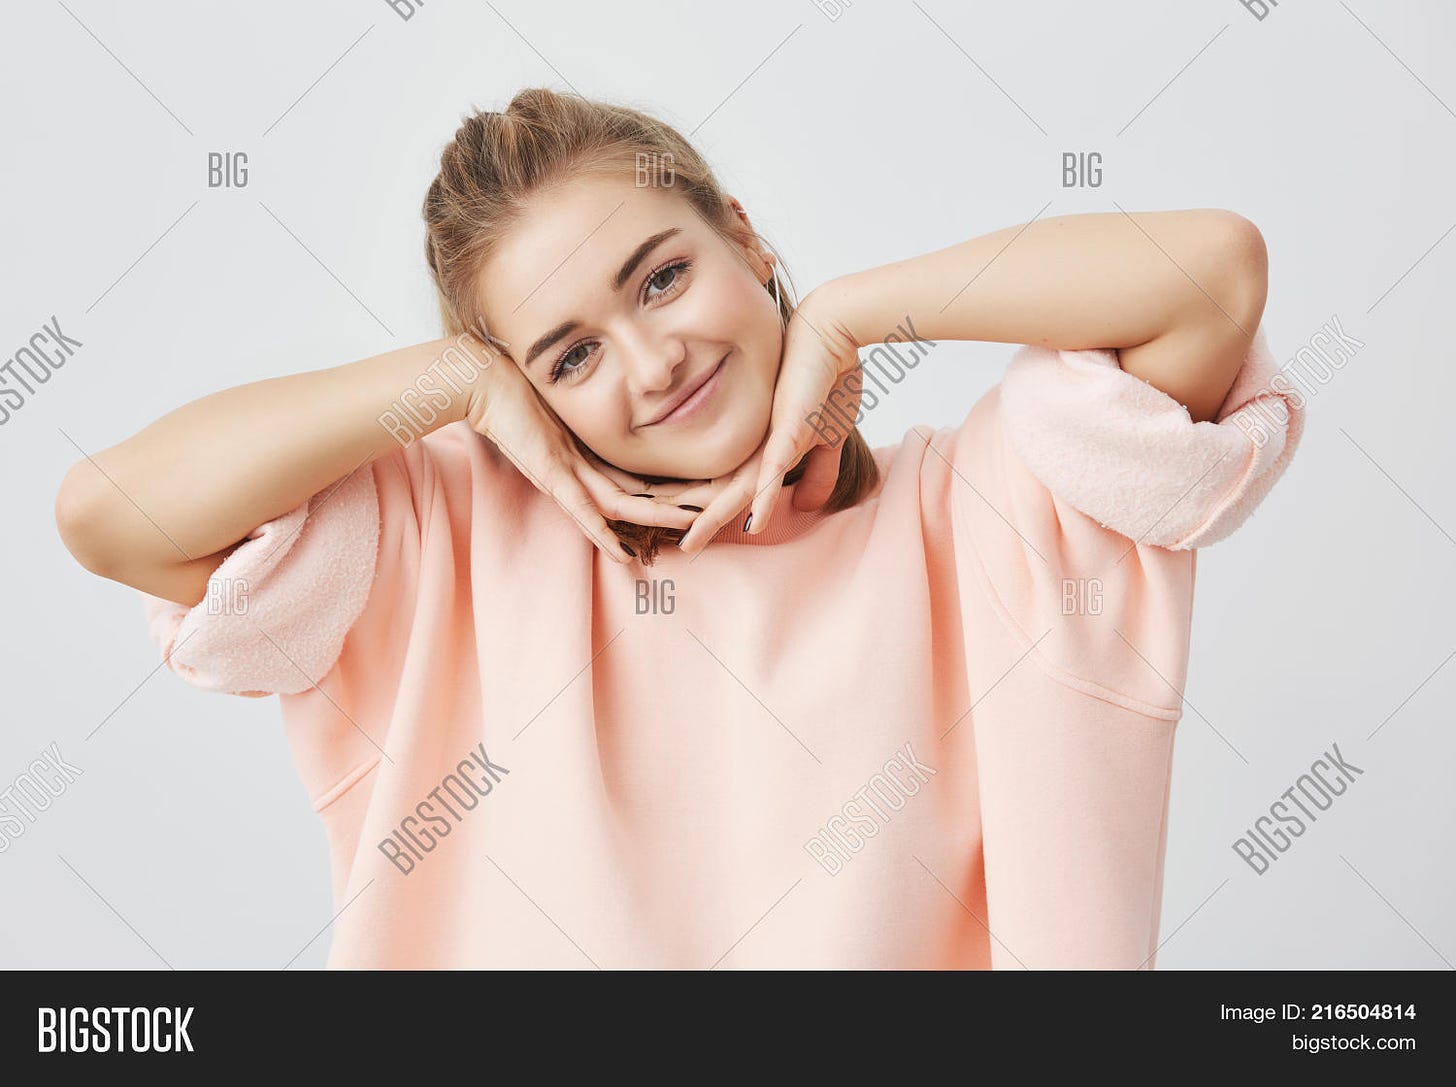 Charming Bright Young Image & Photo (Free Trial) | Bigstock